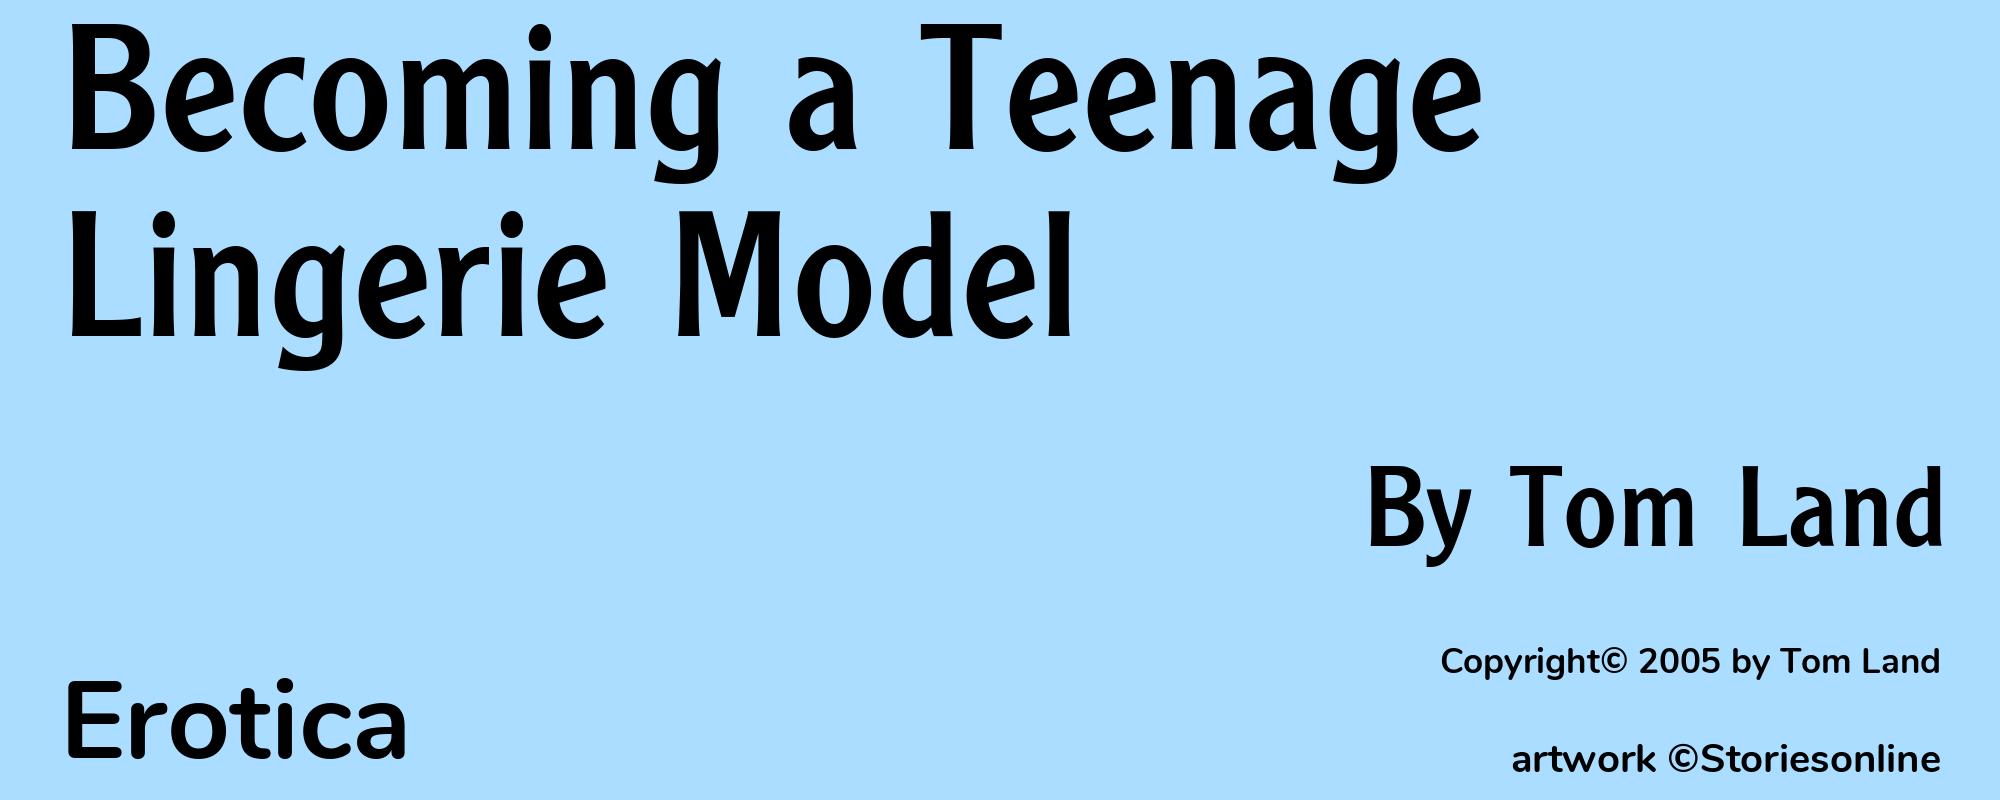 Becoming a Teenage Lingerie Model - Cover